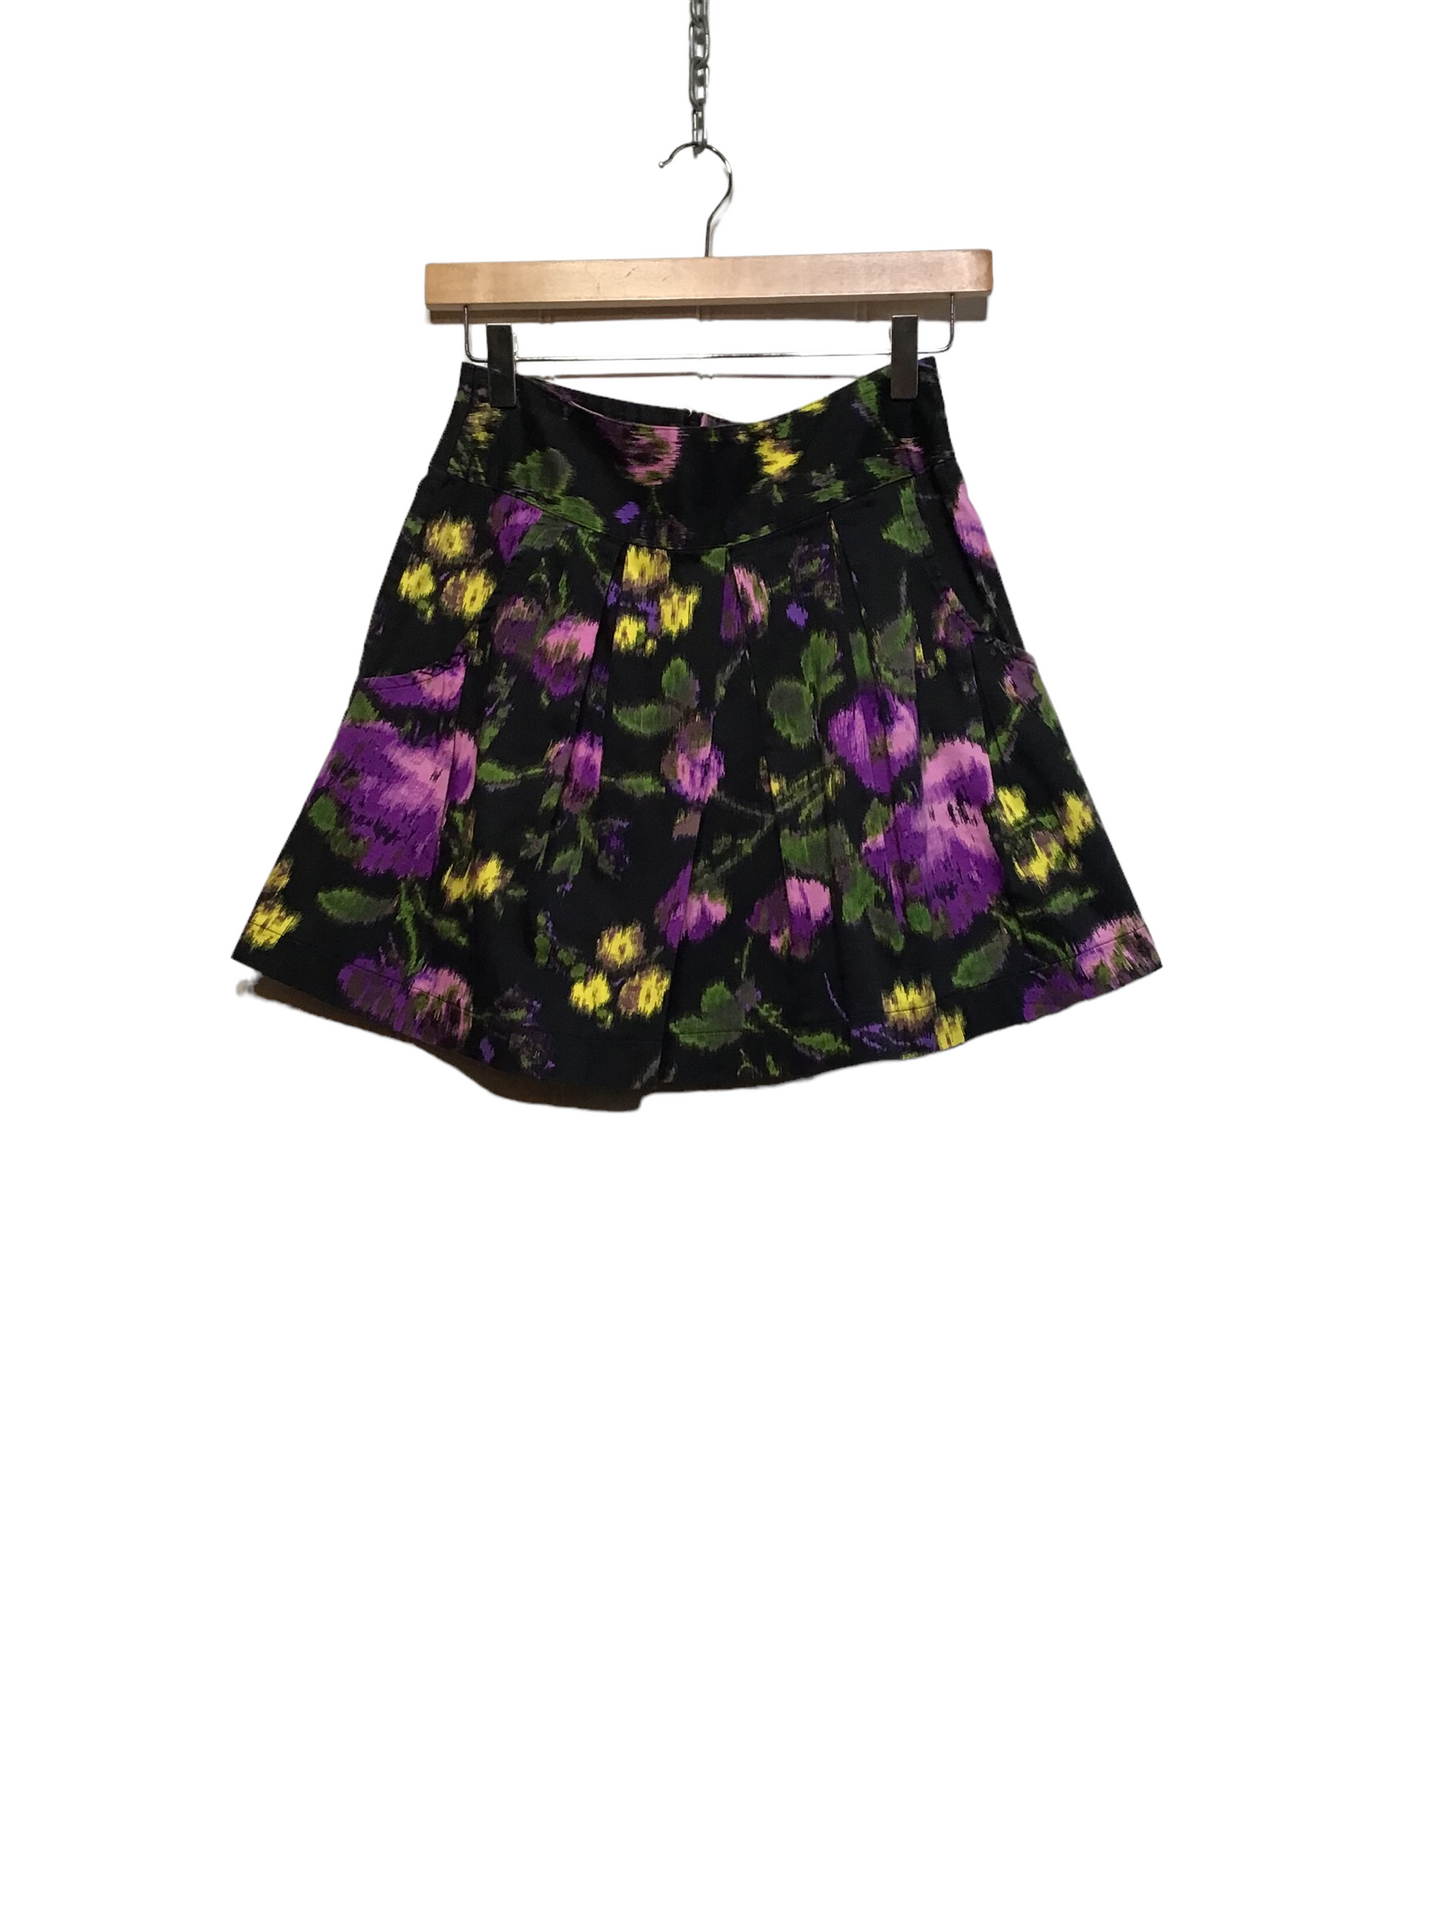 Pleated Flower Patterned Skirt (Size S)